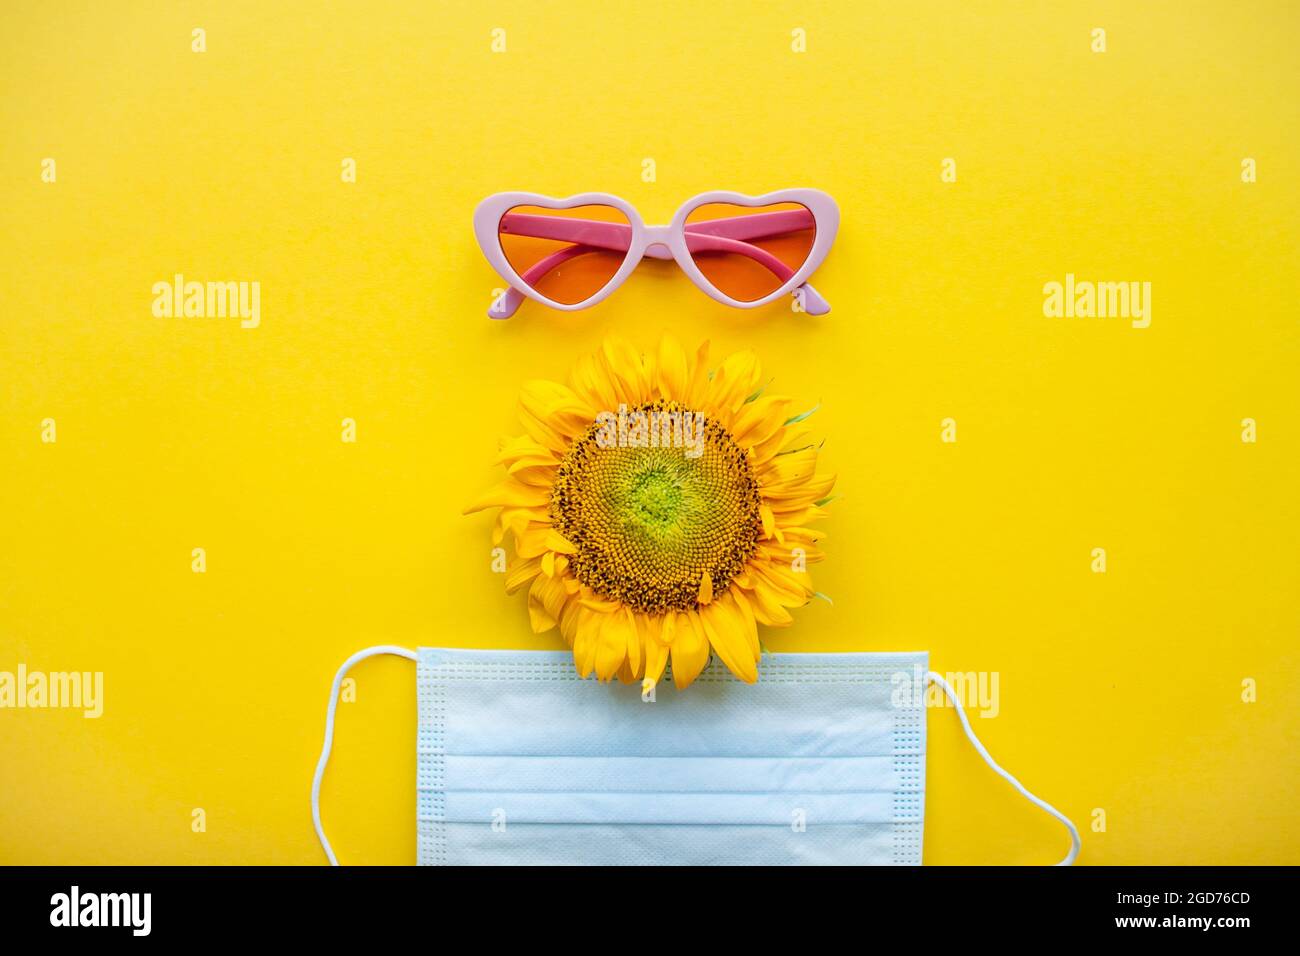 Funny face made of pink heart-shaped sunglasses, a protective medical mask and a sunflower on a bright yellow background Stock Photo